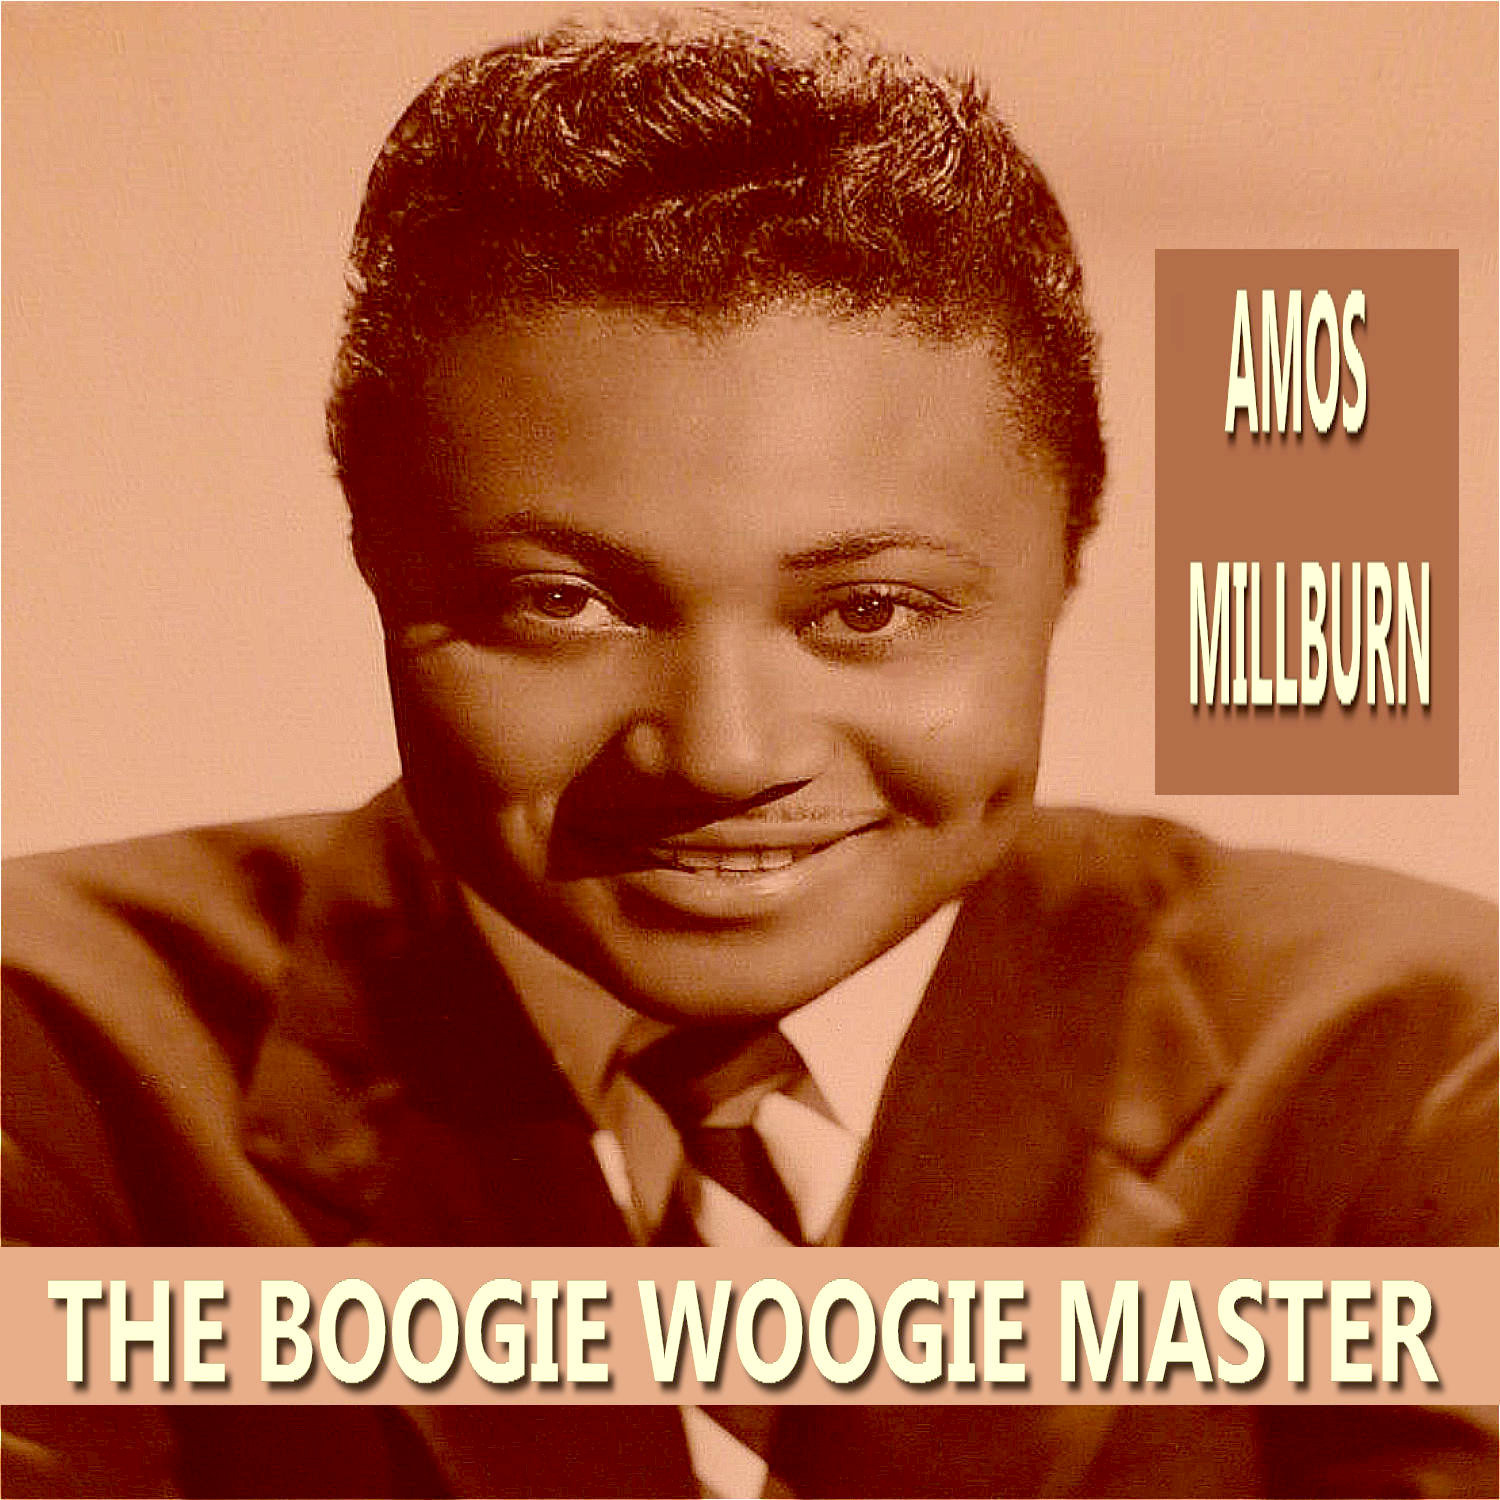 The Boogie Woogie Master